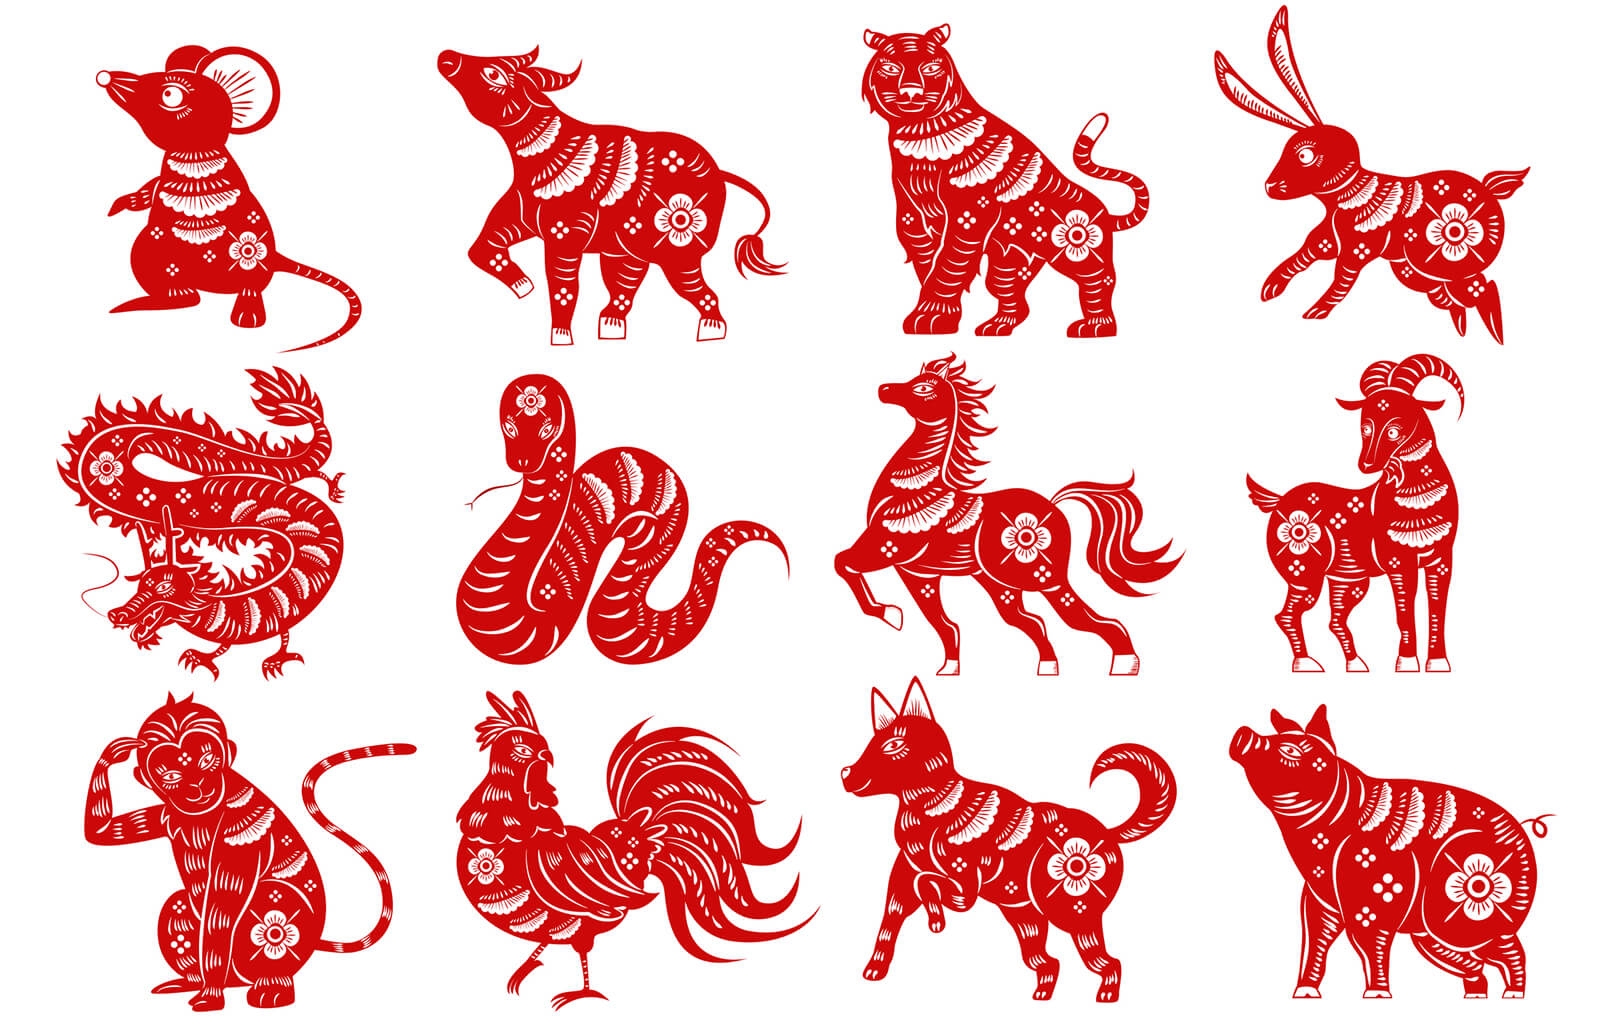 Lunar day (January 27): Auspicious/ Inauspicious, Lucky/ Evil Directions for 12 Chinese Zodiac Signs